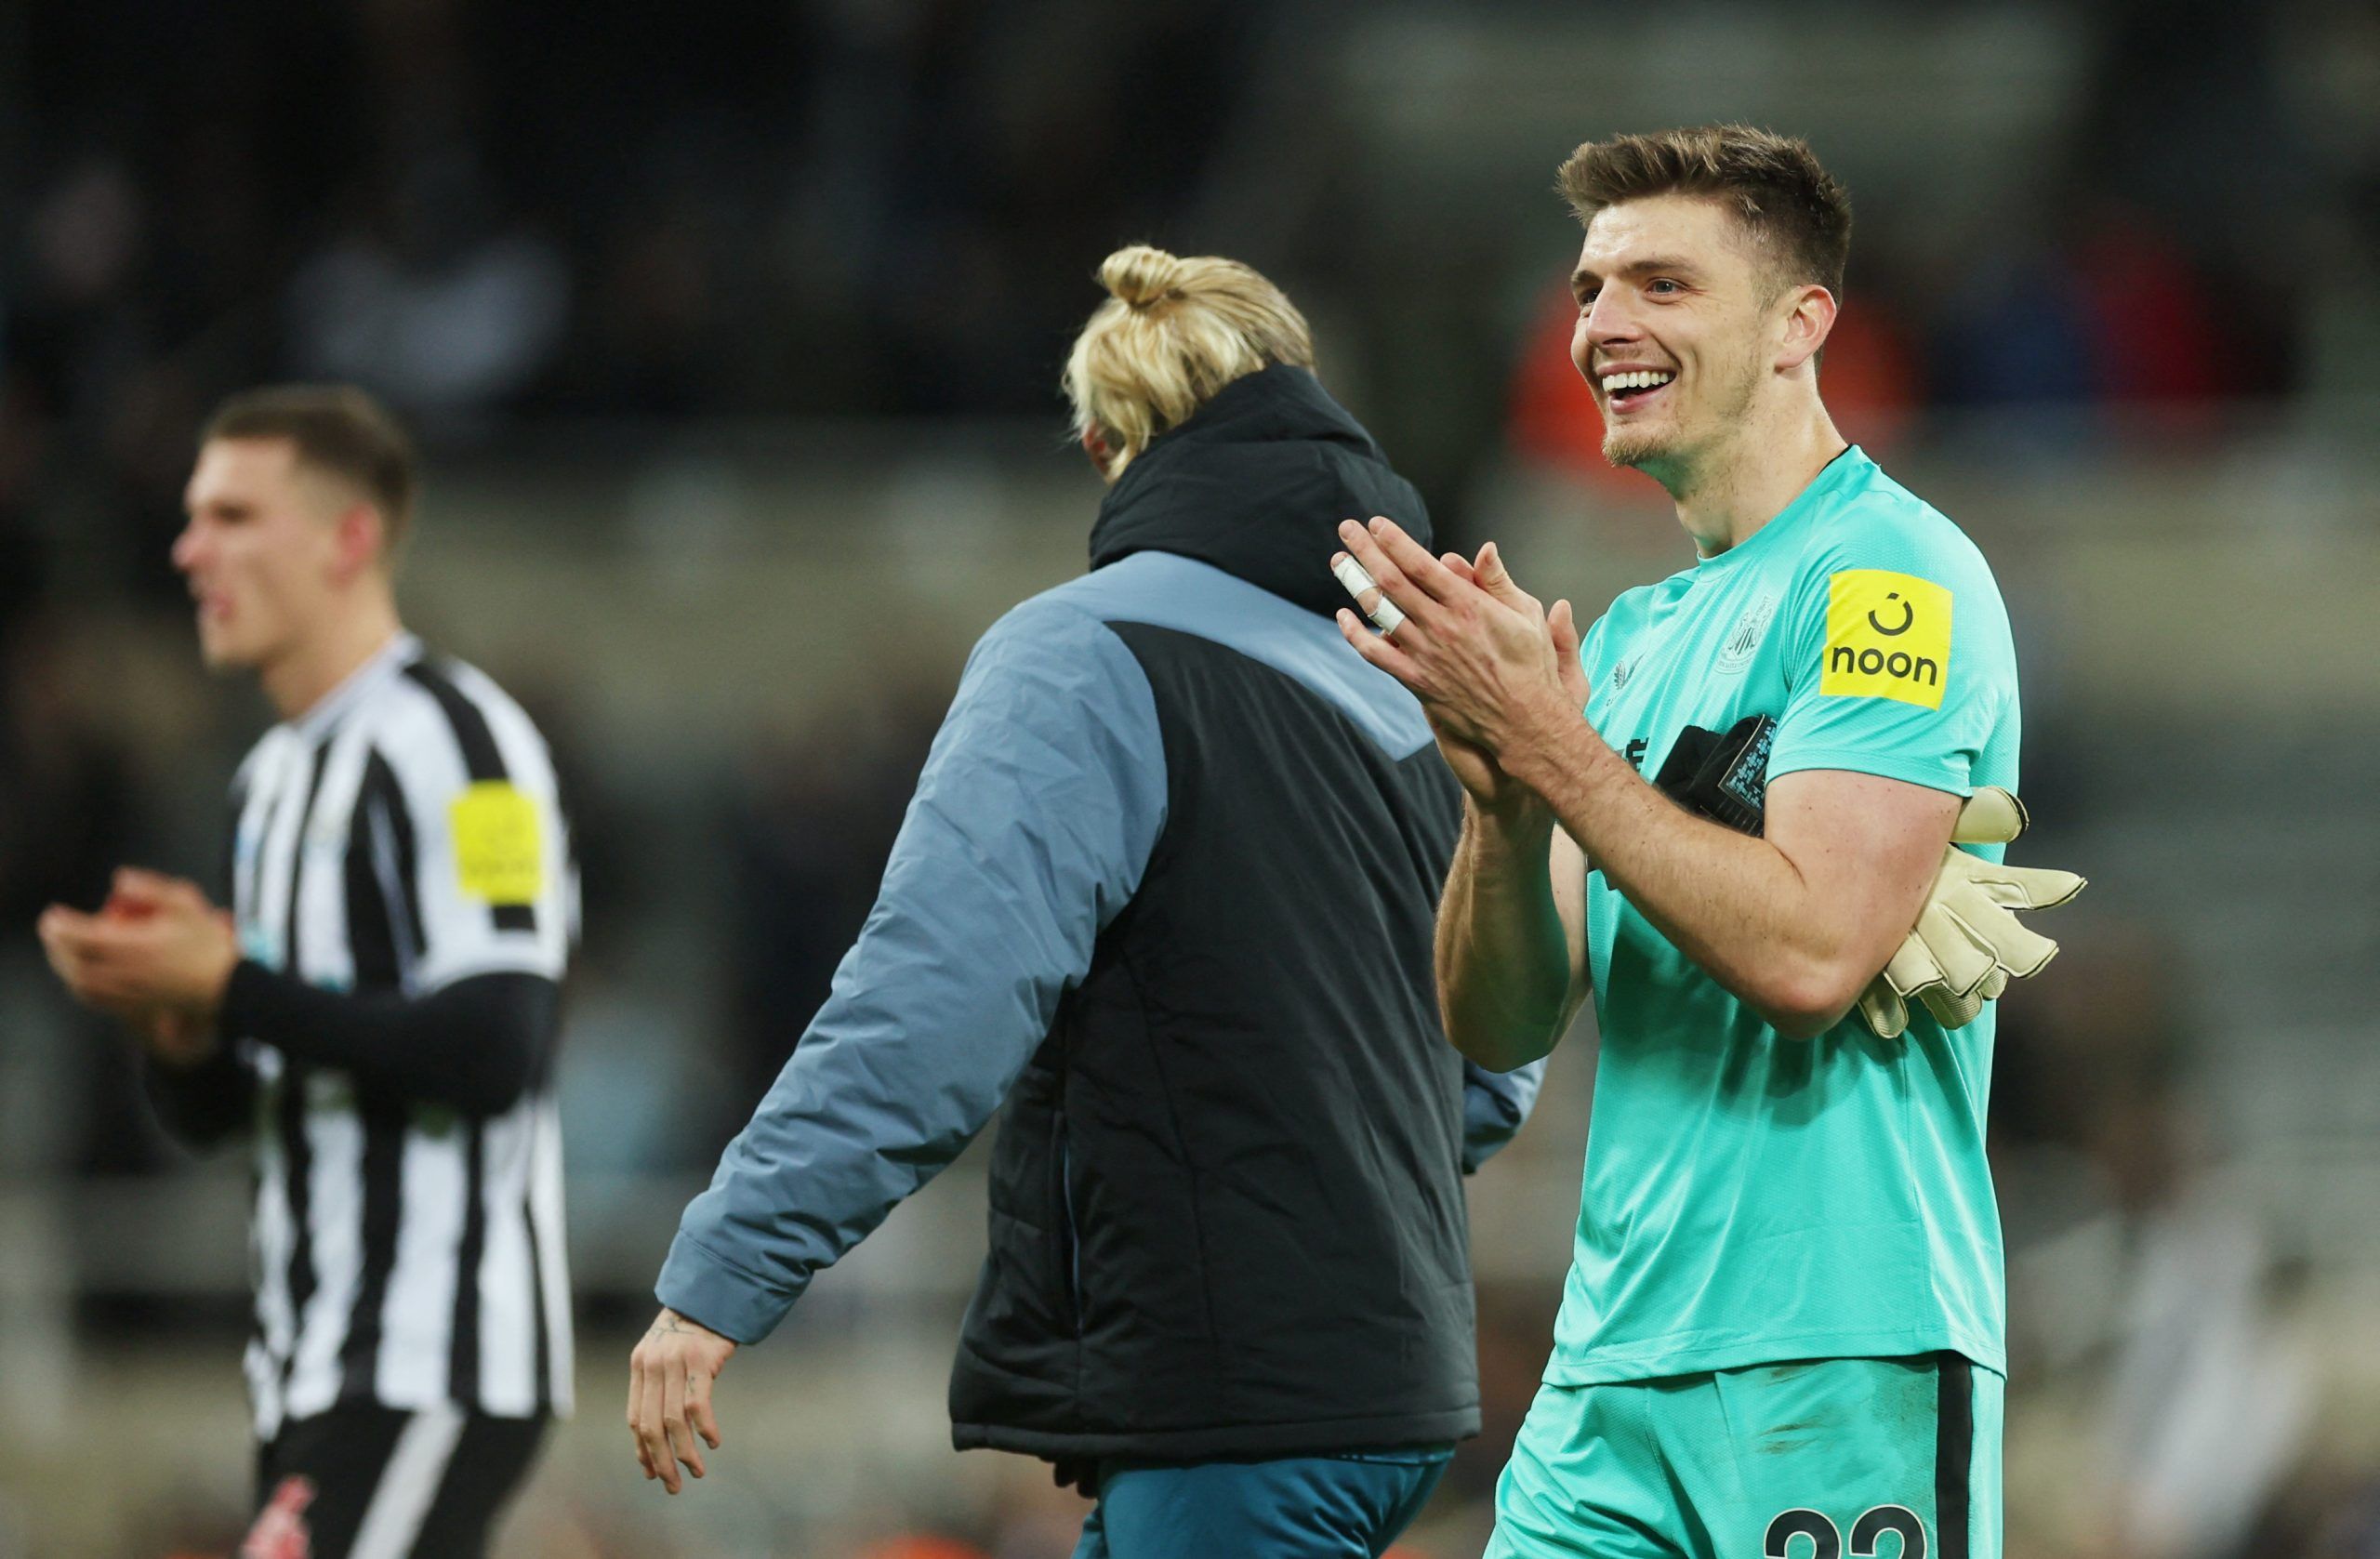 Soccer Football - Carabao Cup Third Round - Newcastle United v Crystal Palace - St James' Park, Newcastle, Britain - November 9, 2022  Newcastle United's Nick Pope celebrates after winning the penalty shootout Action Images via Reuters/Lee Smith EDITORIAL USE ONLY. No use with unauthorized audio, video, data, fixture lists, club/league logos or 'live' services. Online in-match use limited to 75 images, no video emulation. No use in betting, games or single club /league/player publications.  Plea